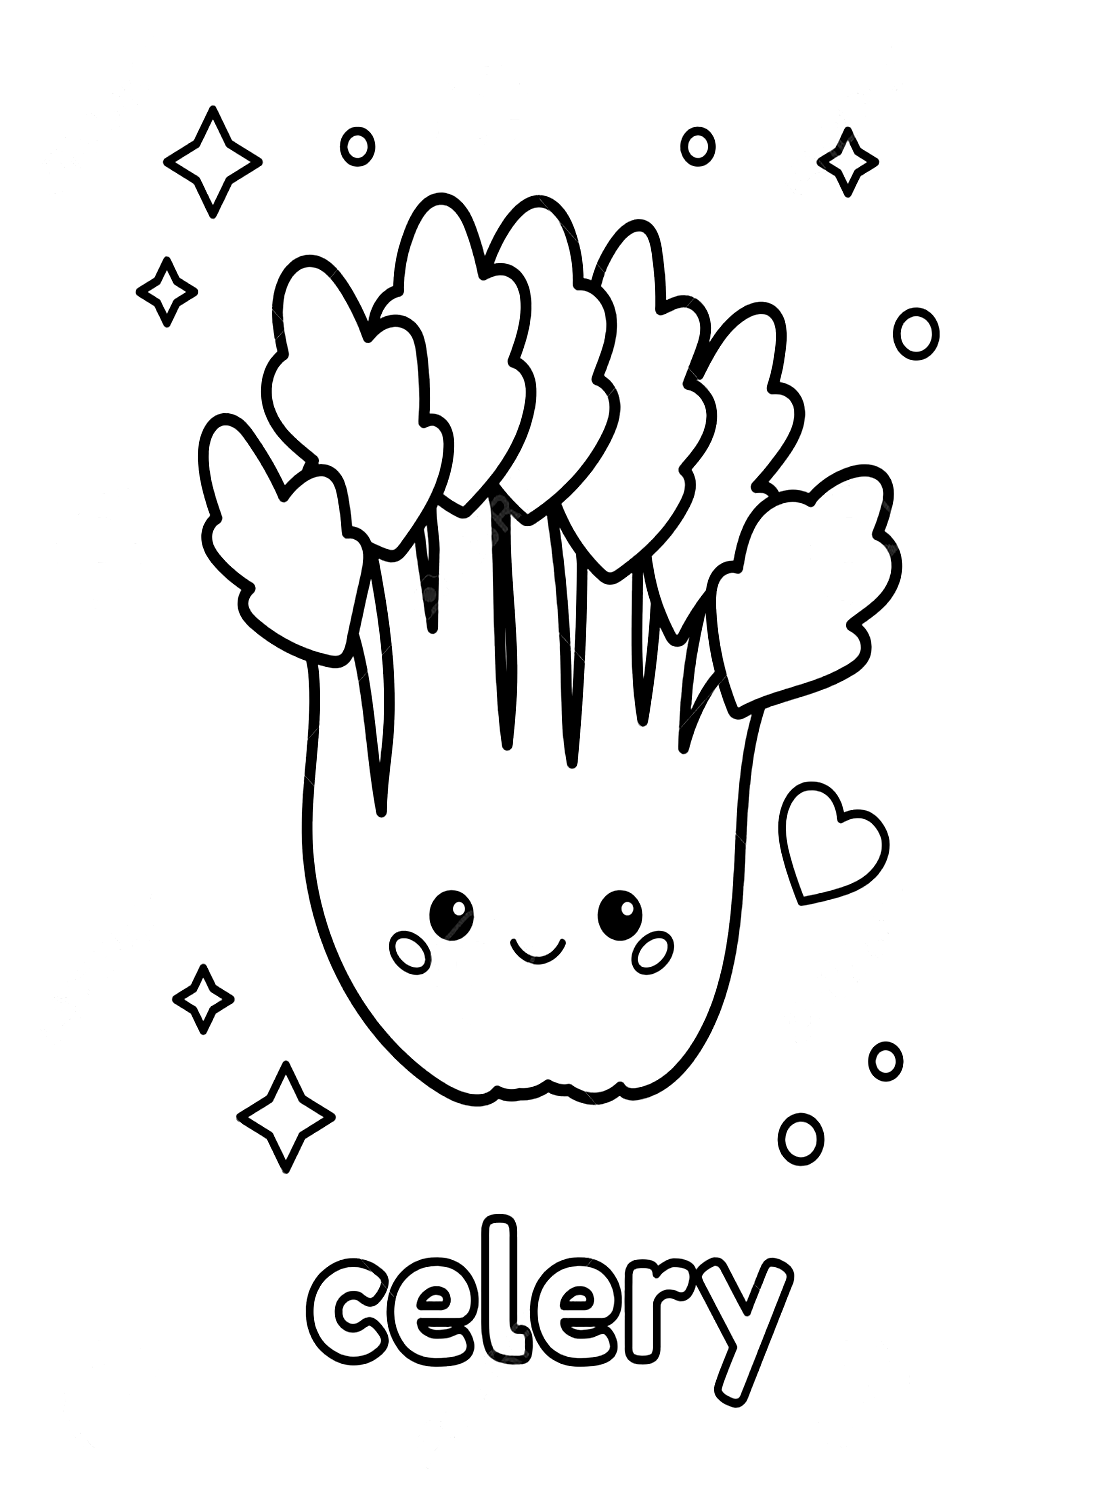 Celery Coloring Page from Celery